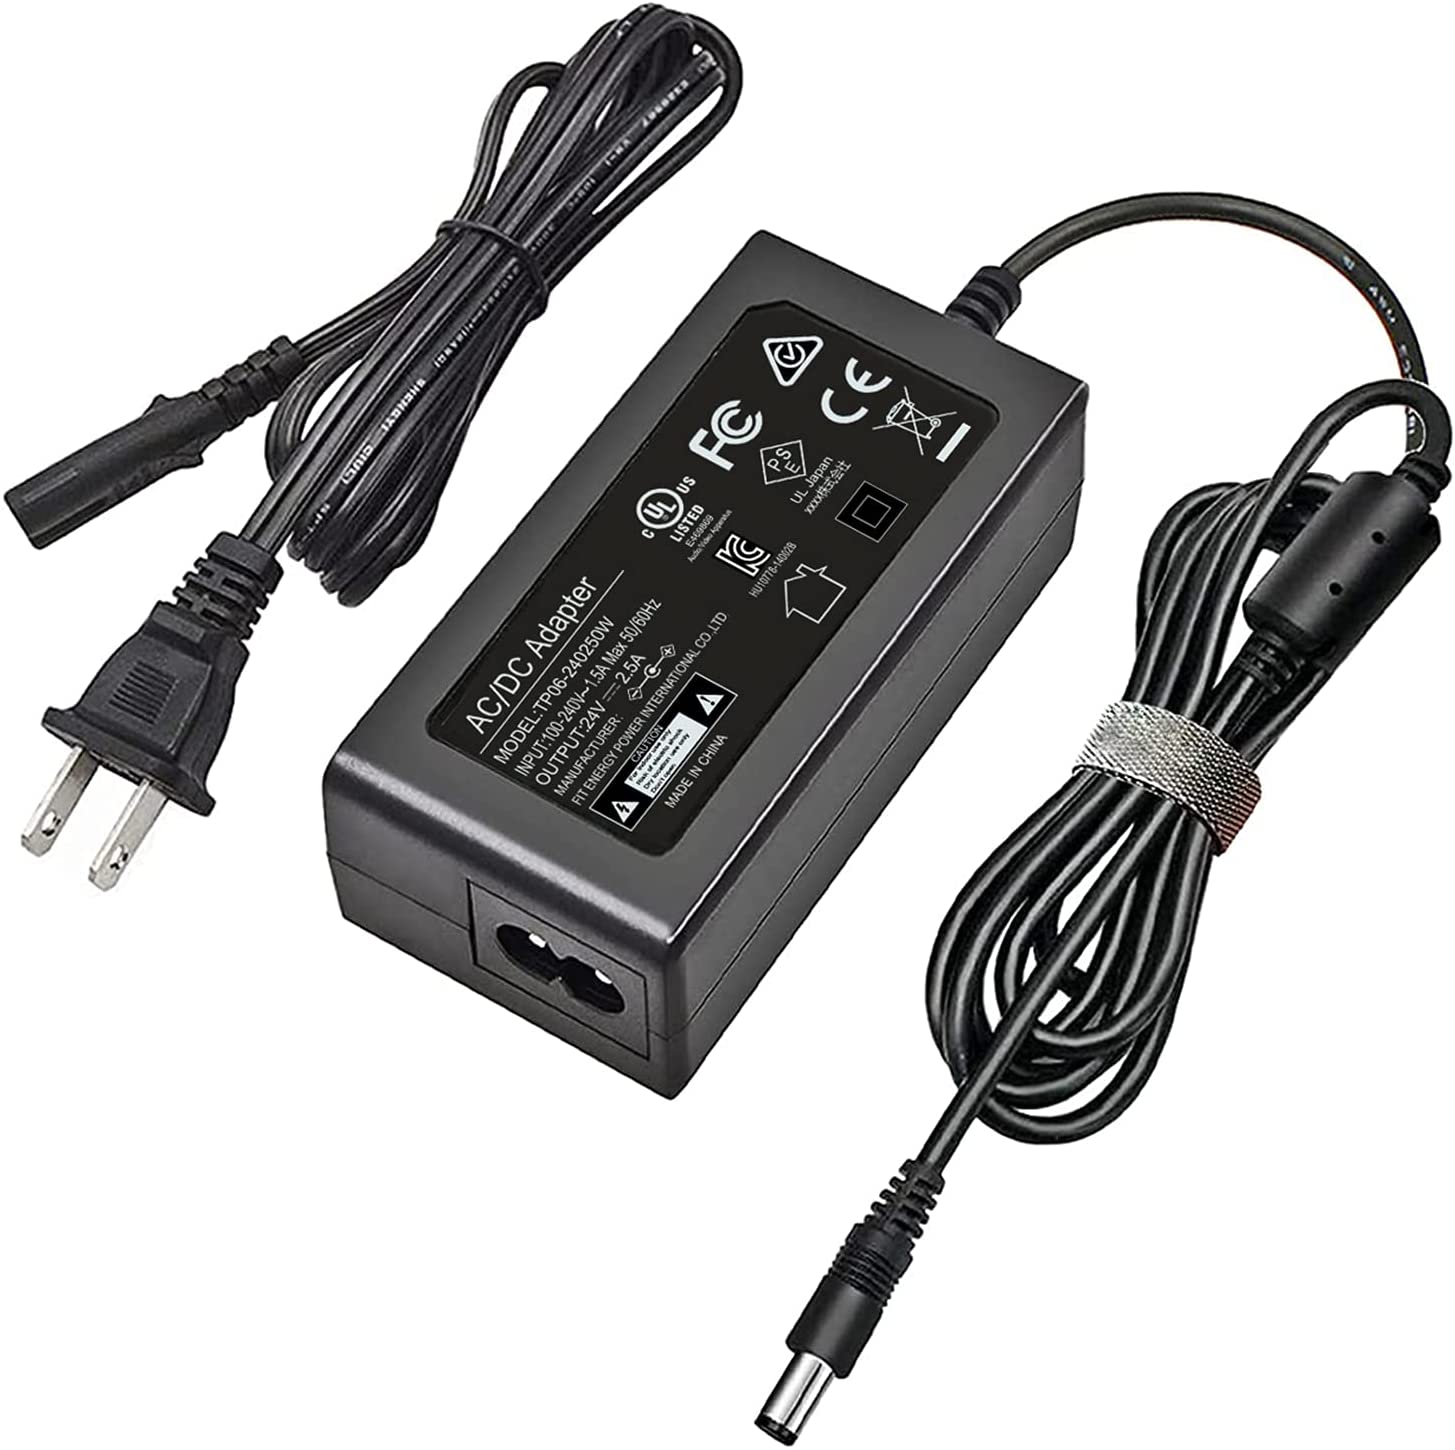 DSA-65W-224060 24V AC/DC Adapter Power Cord UL Listed Replacement for Silhouette Cameo 1 2 3 4 SD Portrait Electronic